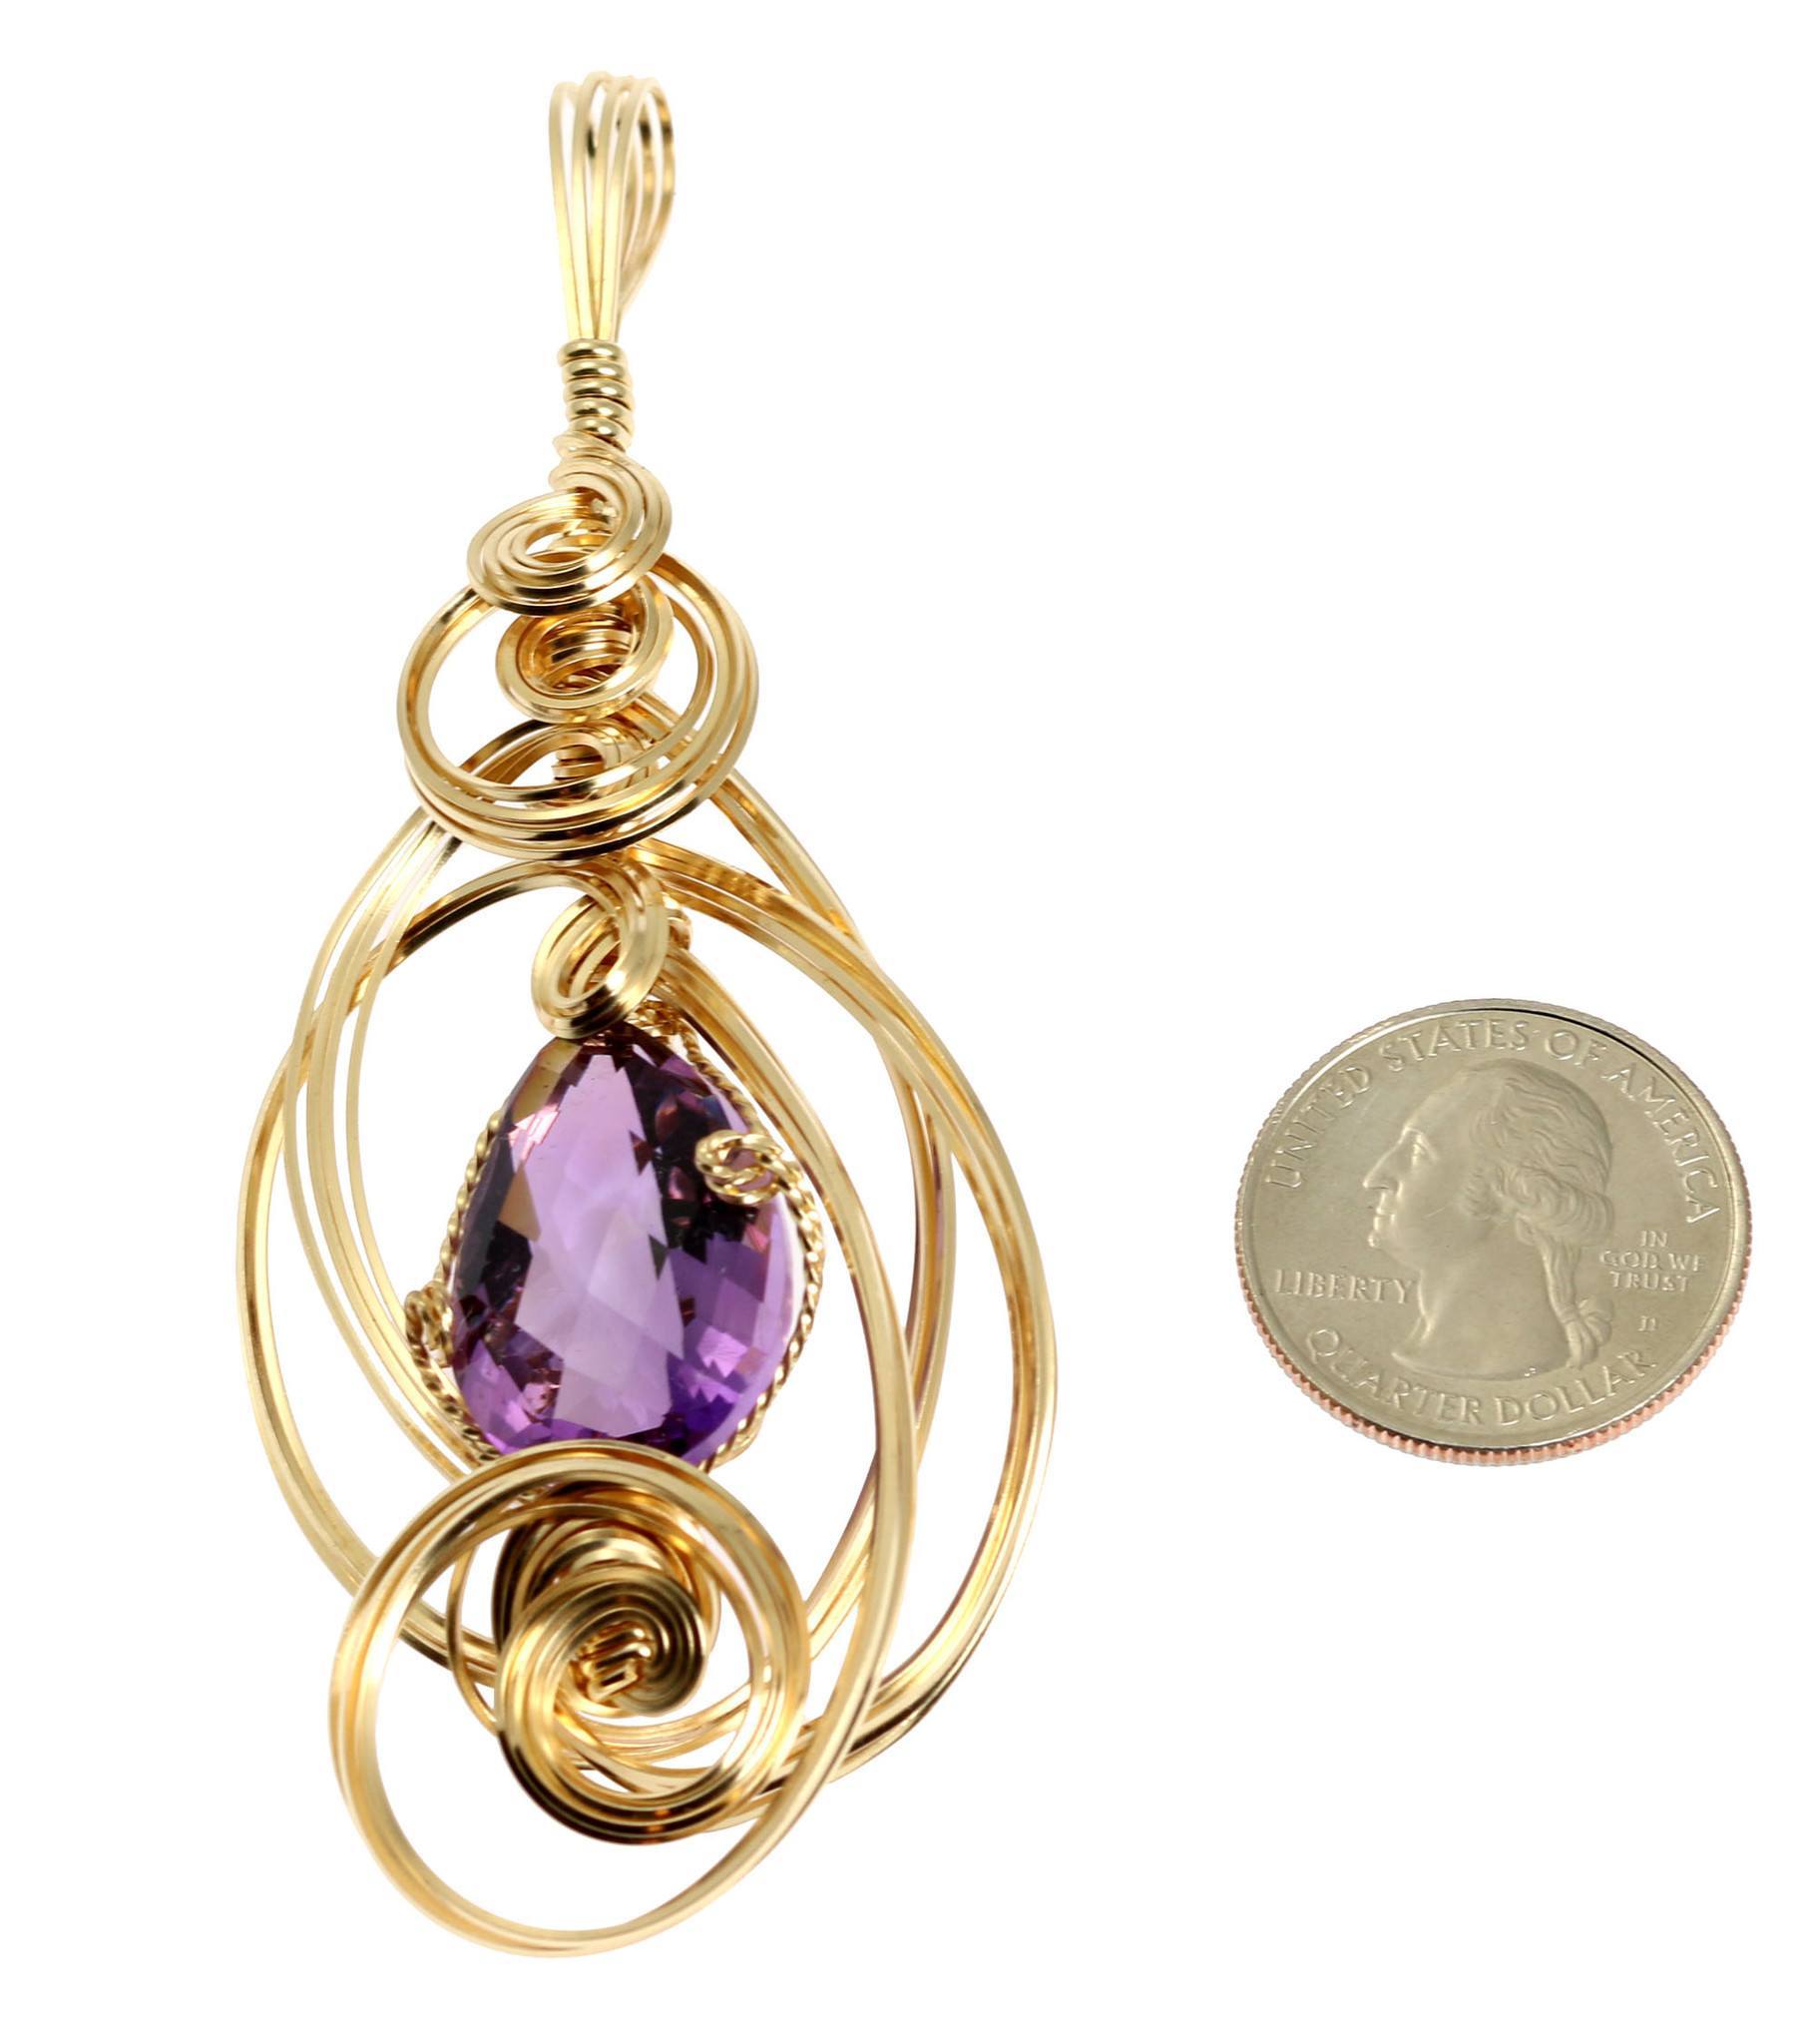 Size of Amethyst 14K Gold-filled Wire Wrapped Pendant